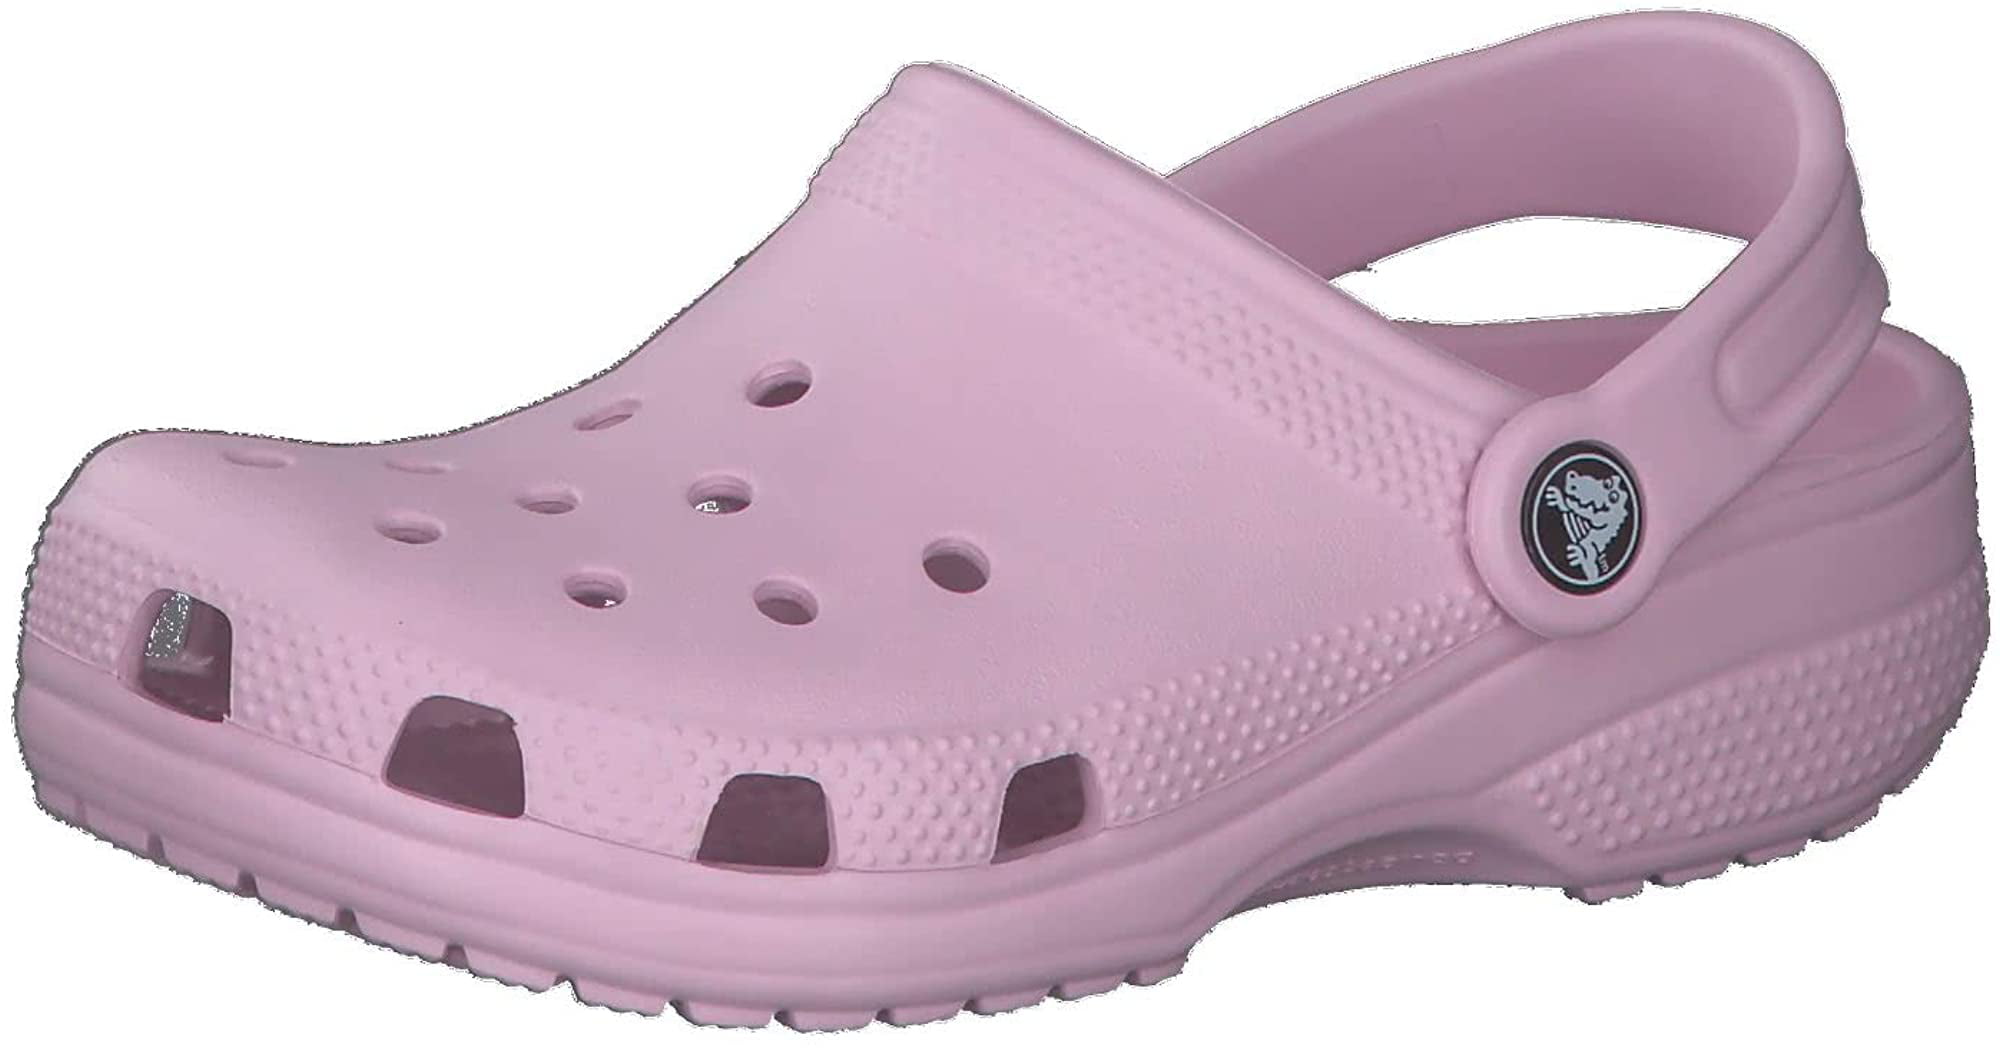 Water Shoes Crocs Unisex Child Kids Classic Clog Slip On Boys and Girls 